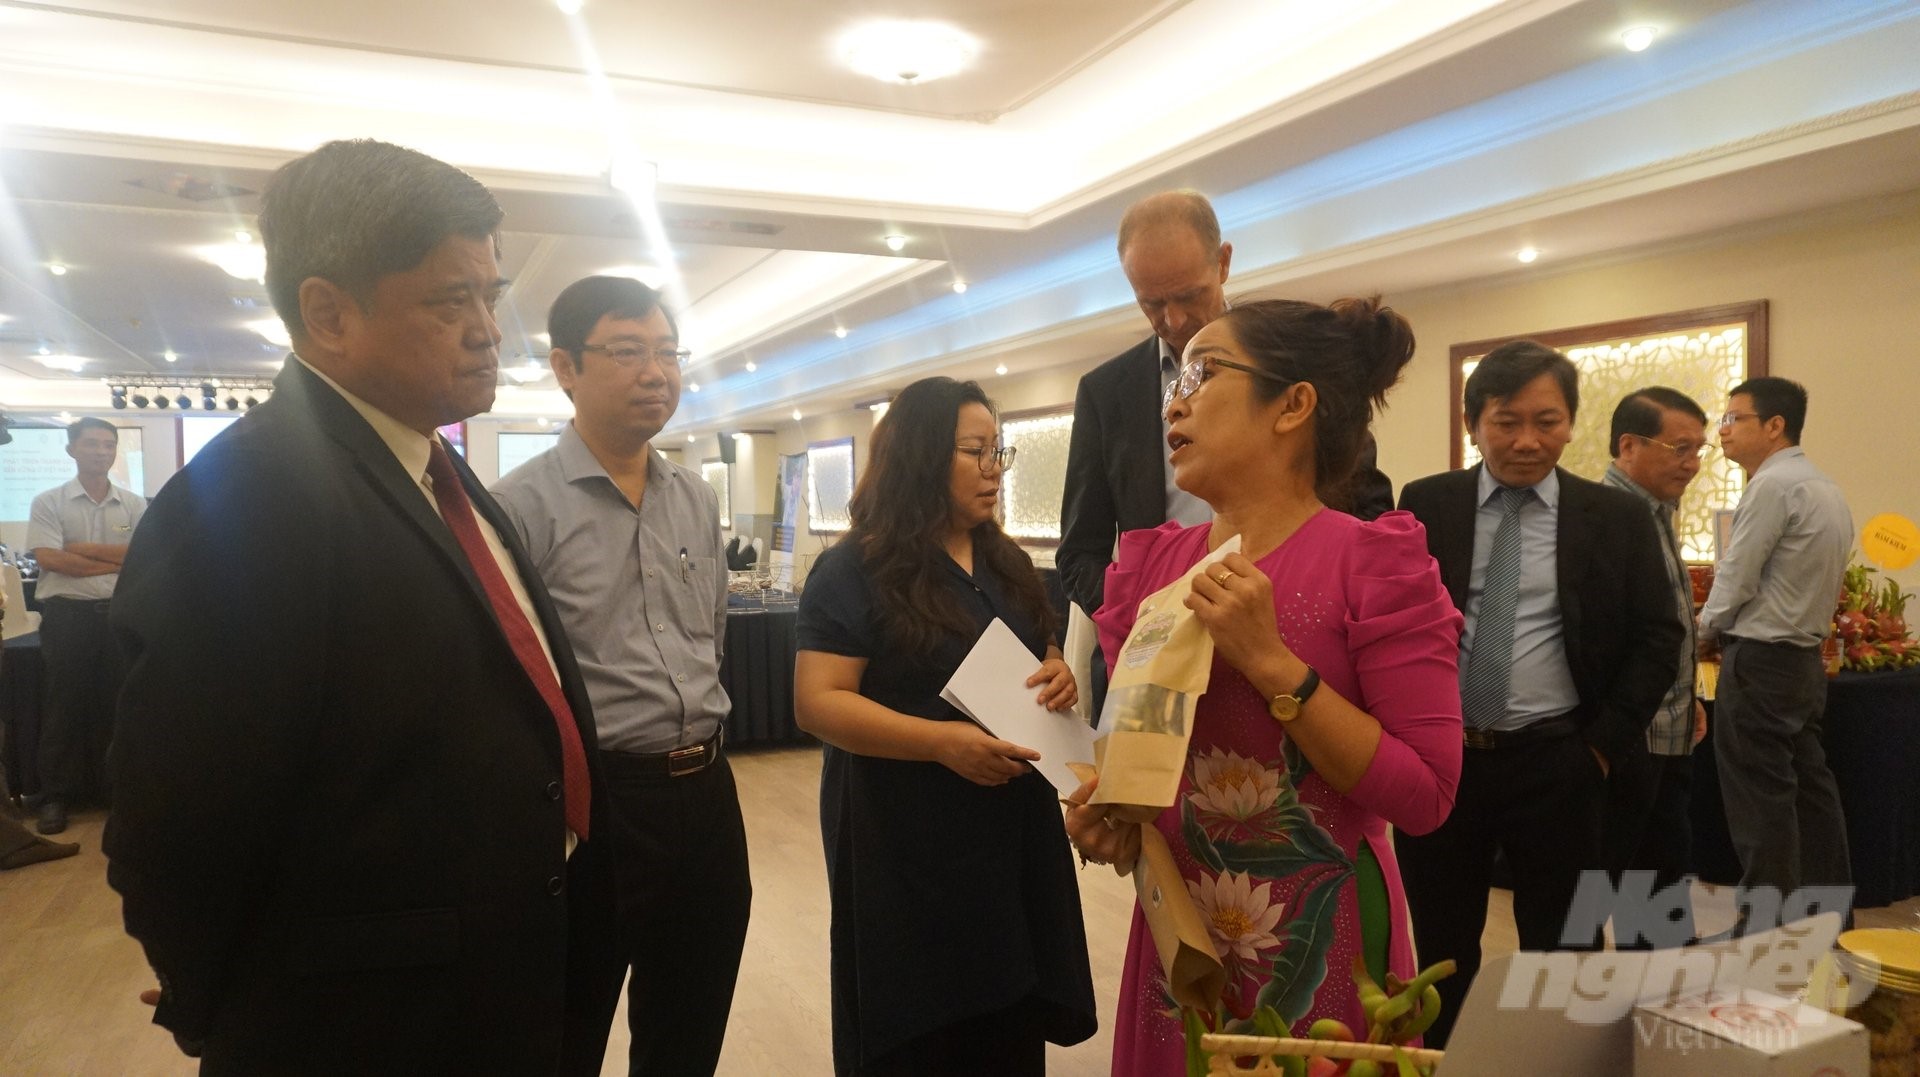 Representatives of Hoa Le Clean Dragon Fruit Cooperative introduced products made from dragon fruit to Deputy Minister Tran Thanh Nam. Photo: Nguyen Thuy.